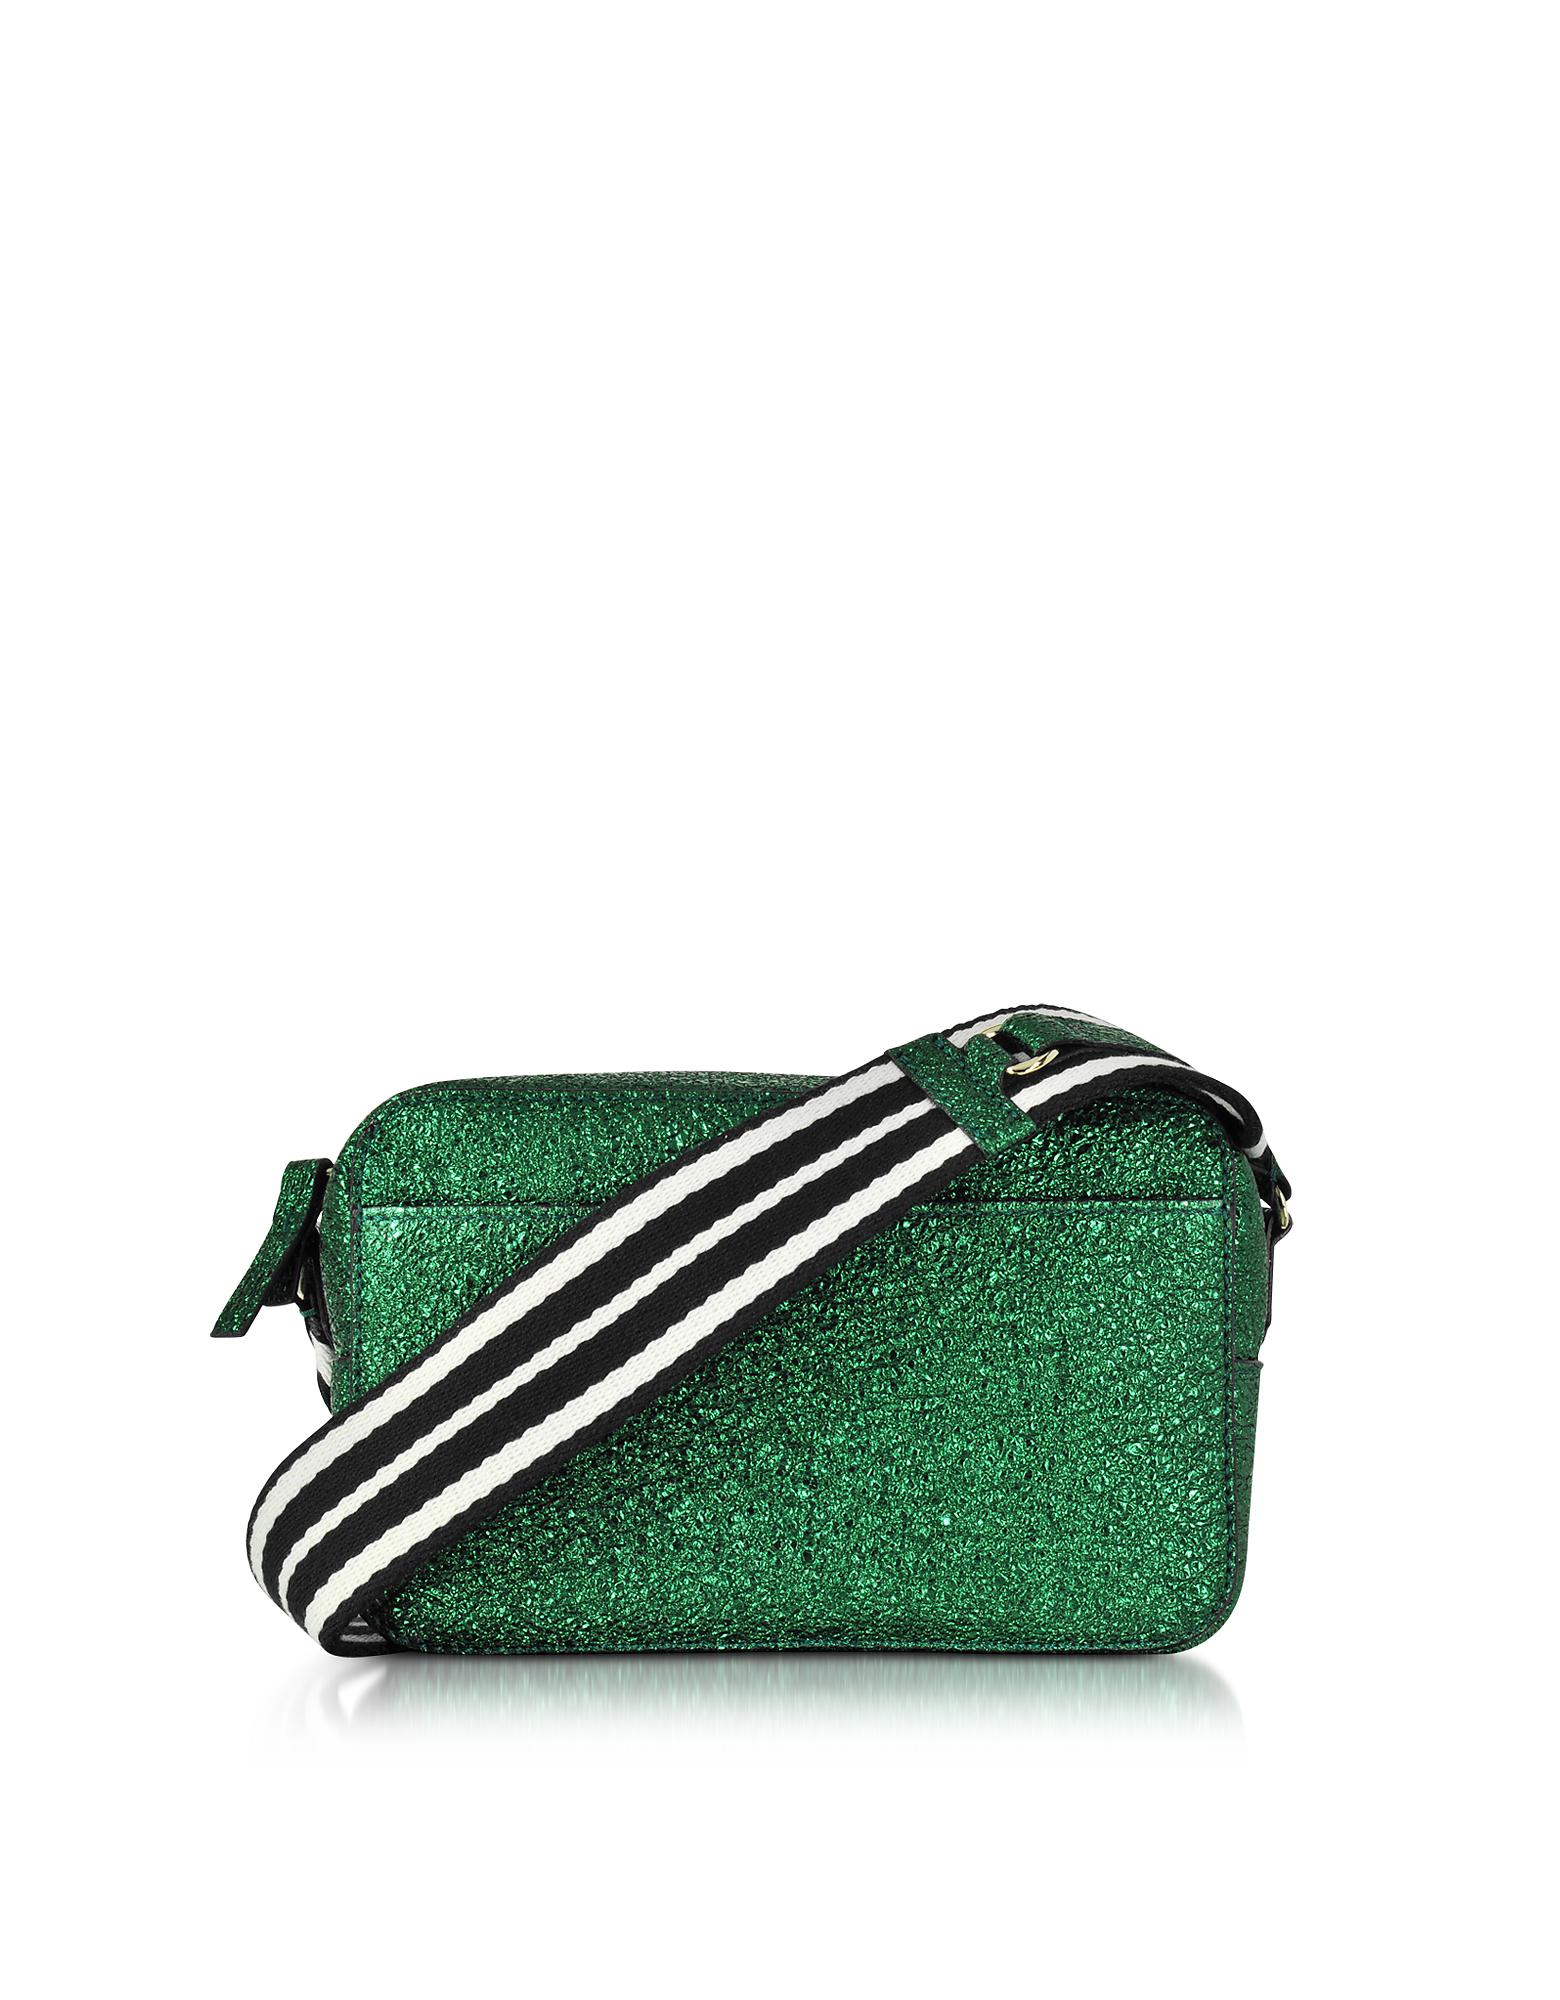 RED Valentino Dark Green Crackled Metallic Leather Crossbody Bag W/striped Canvas Strap in Green ...